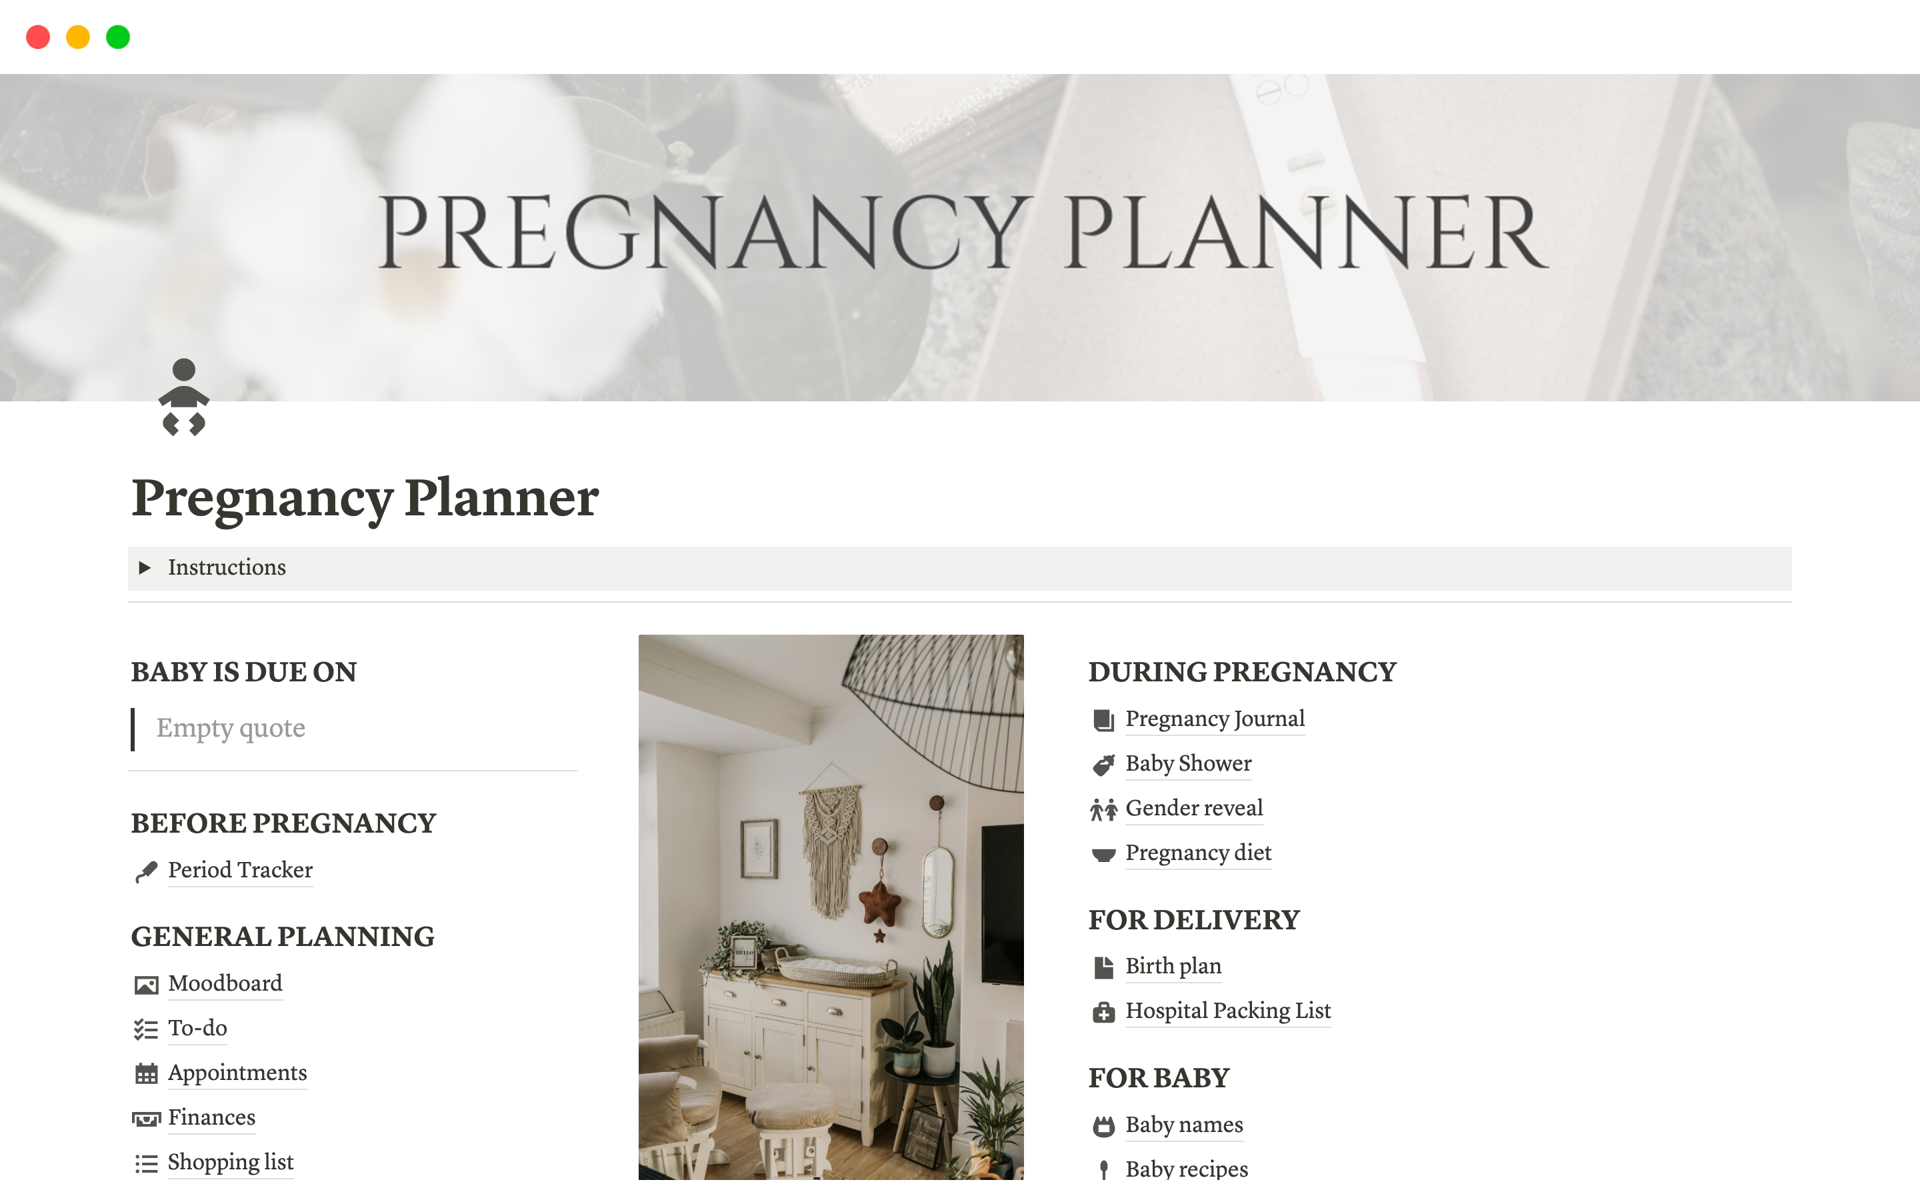 This pregnancy planner is the one you need to plan your baby’s birth, write your pregnancy journal, write your birth plan, stay on top of tasks and appointments and much more.